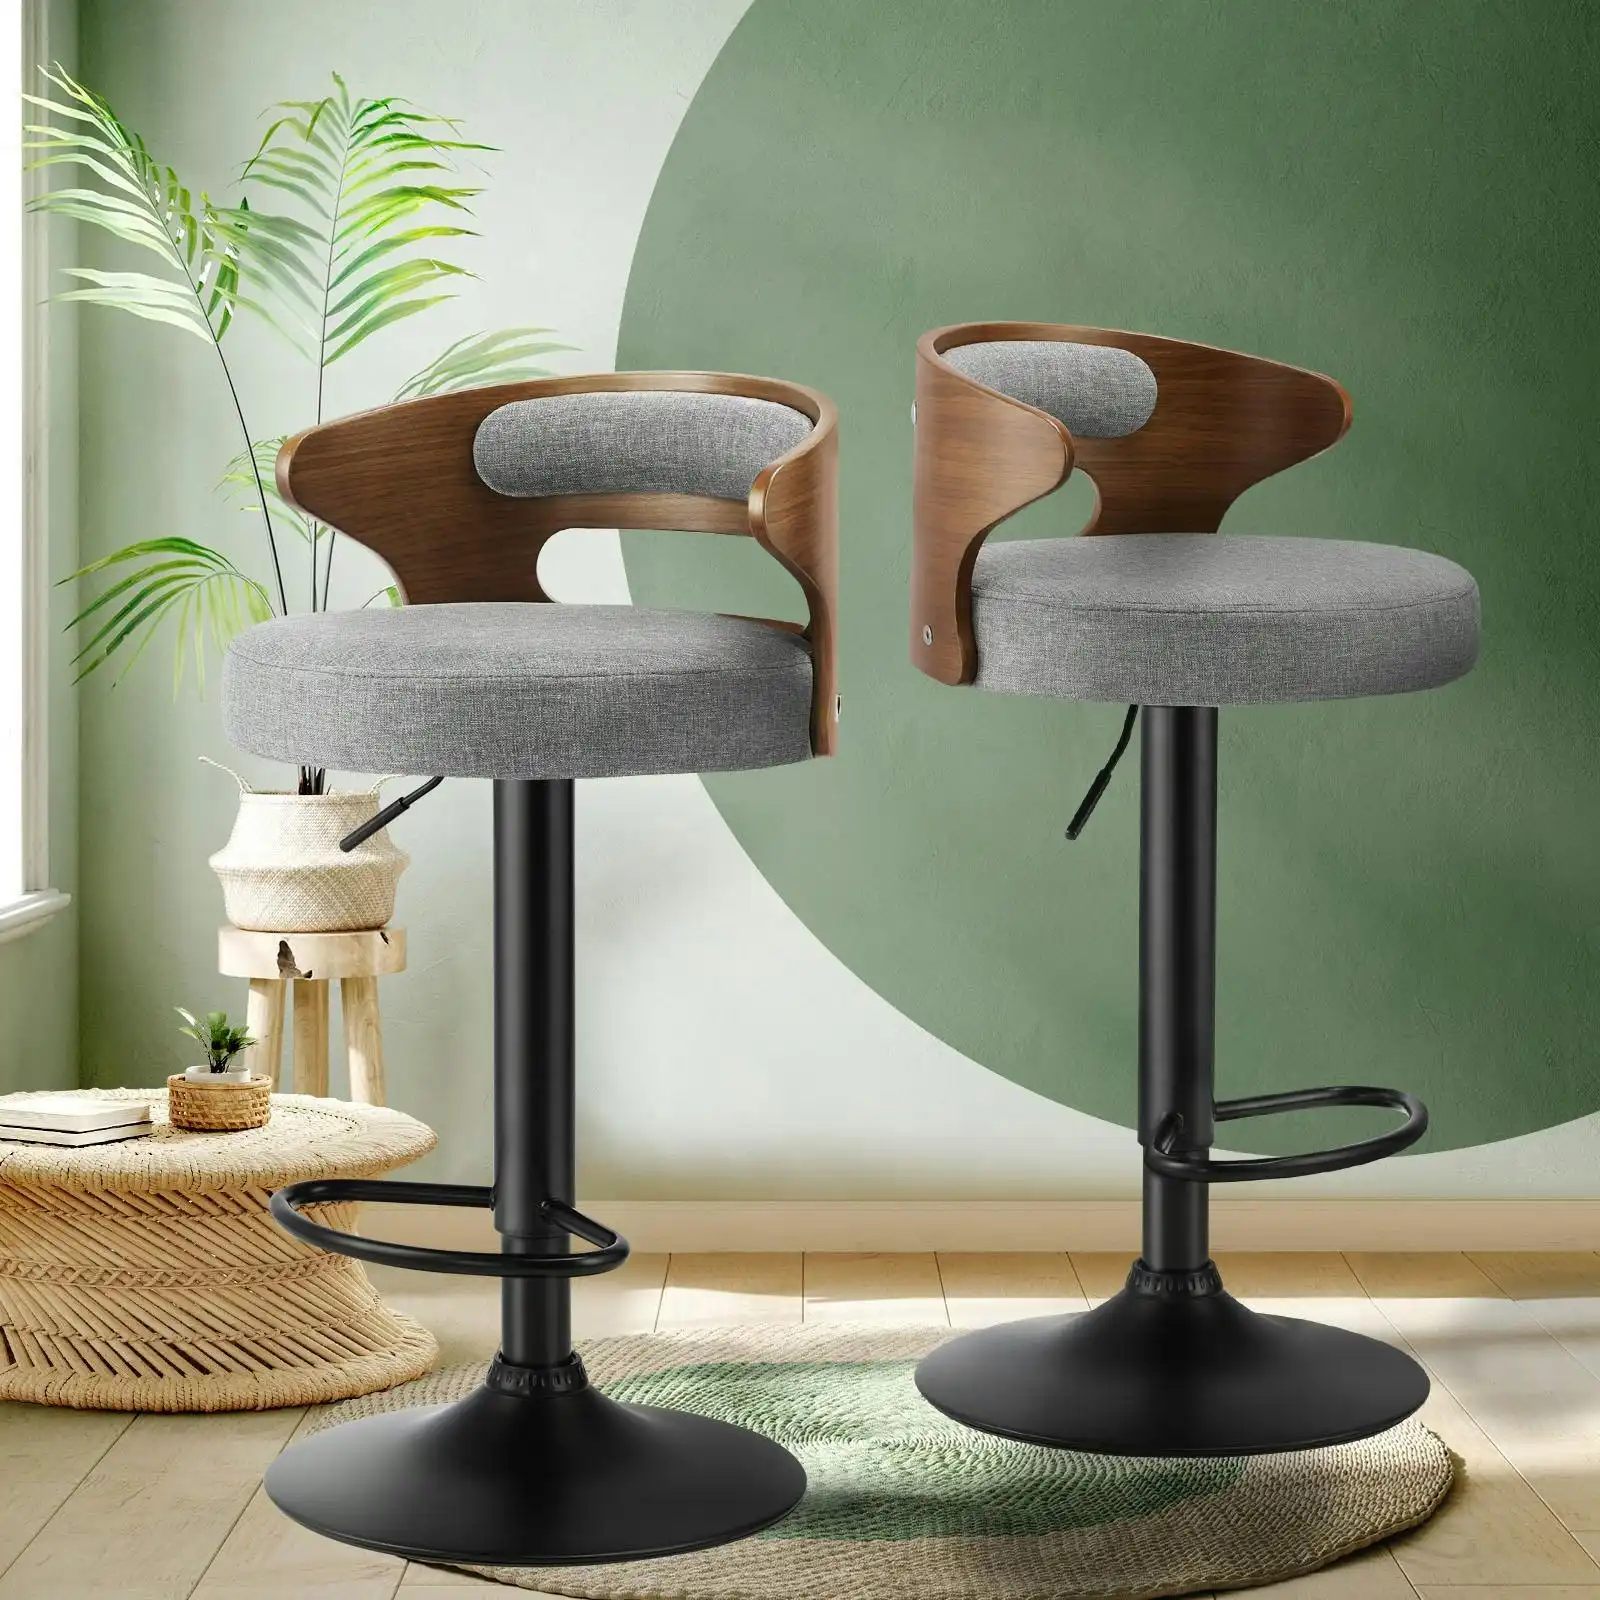 Oikiture Bar Stools Kitchen Gas Lift Swivel Chairs Stool Wooden Barstool Grey x2